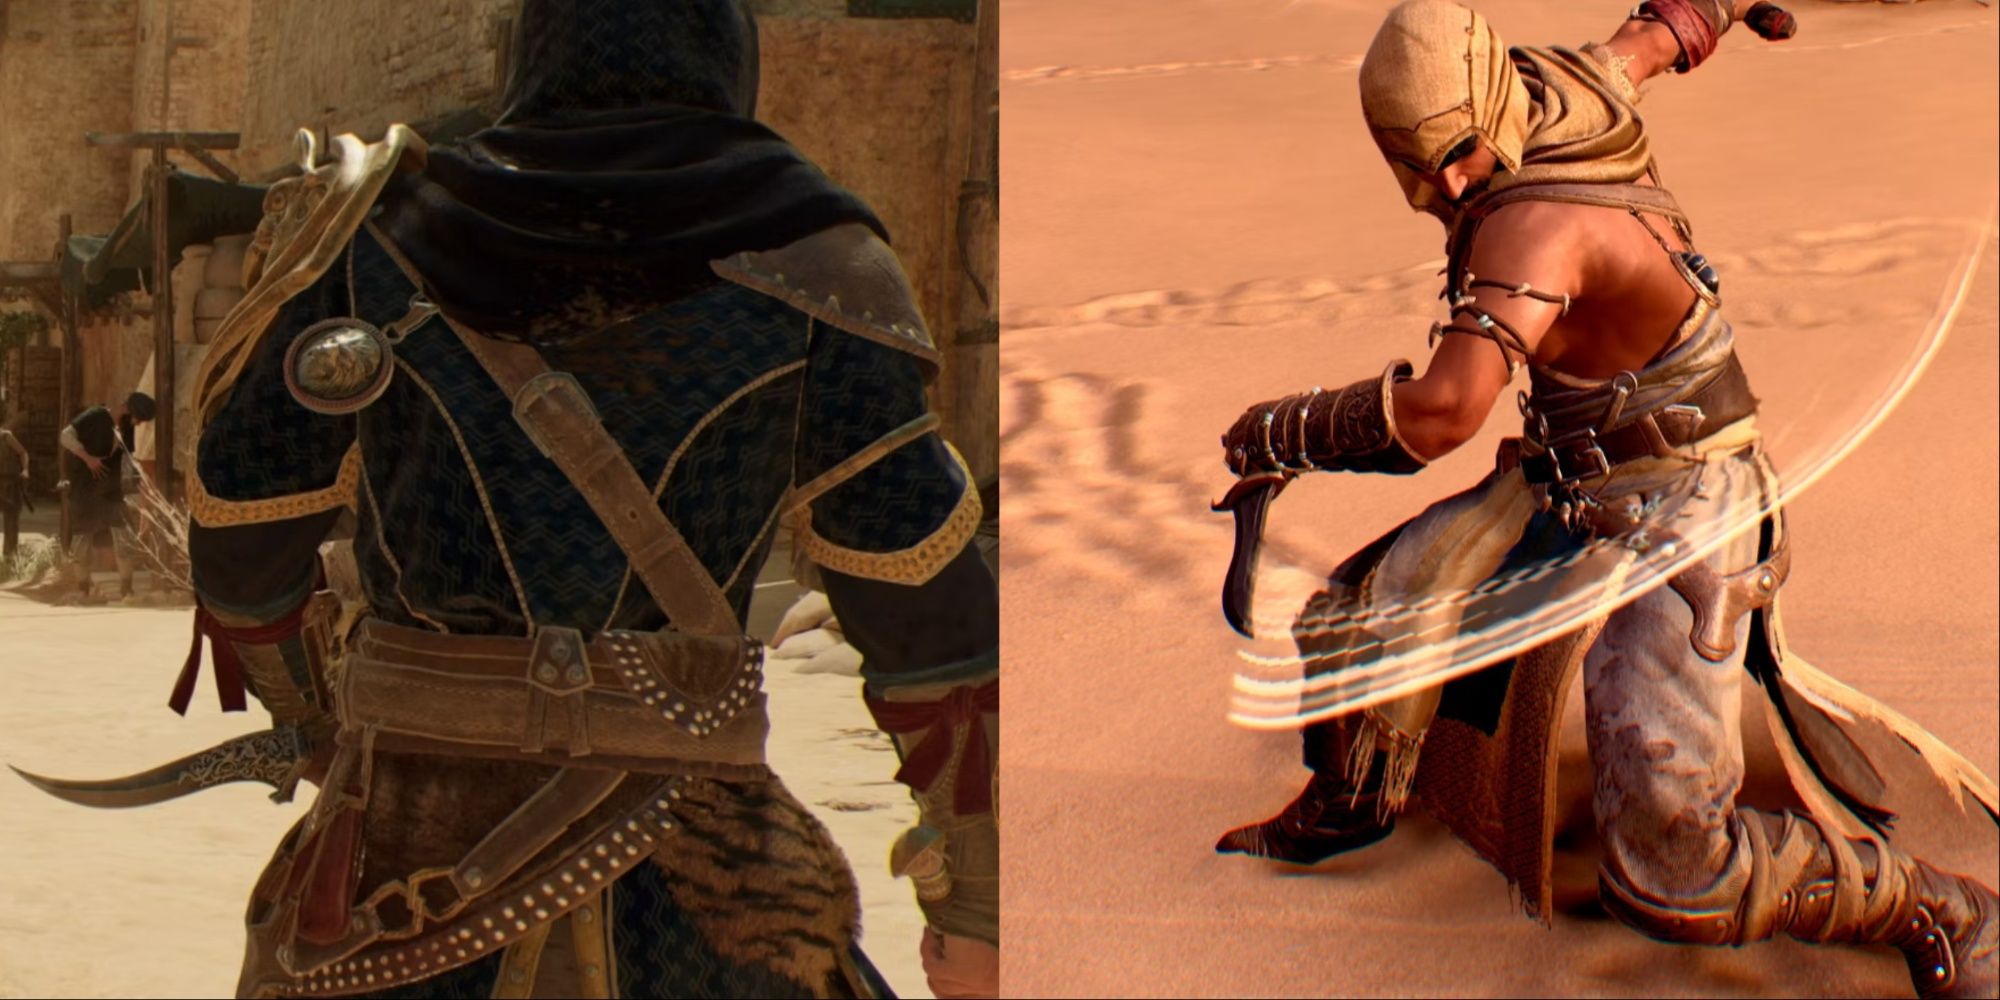 Split-image of Basim holding an Abbasid Dagger in a town square and Basim swinging a dagger in the Zanj Uprising Outfit in the desert.